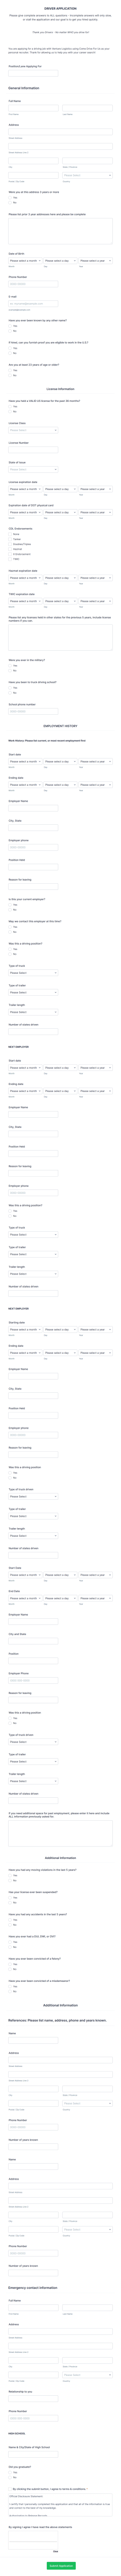 Truck Driver Application Form Template